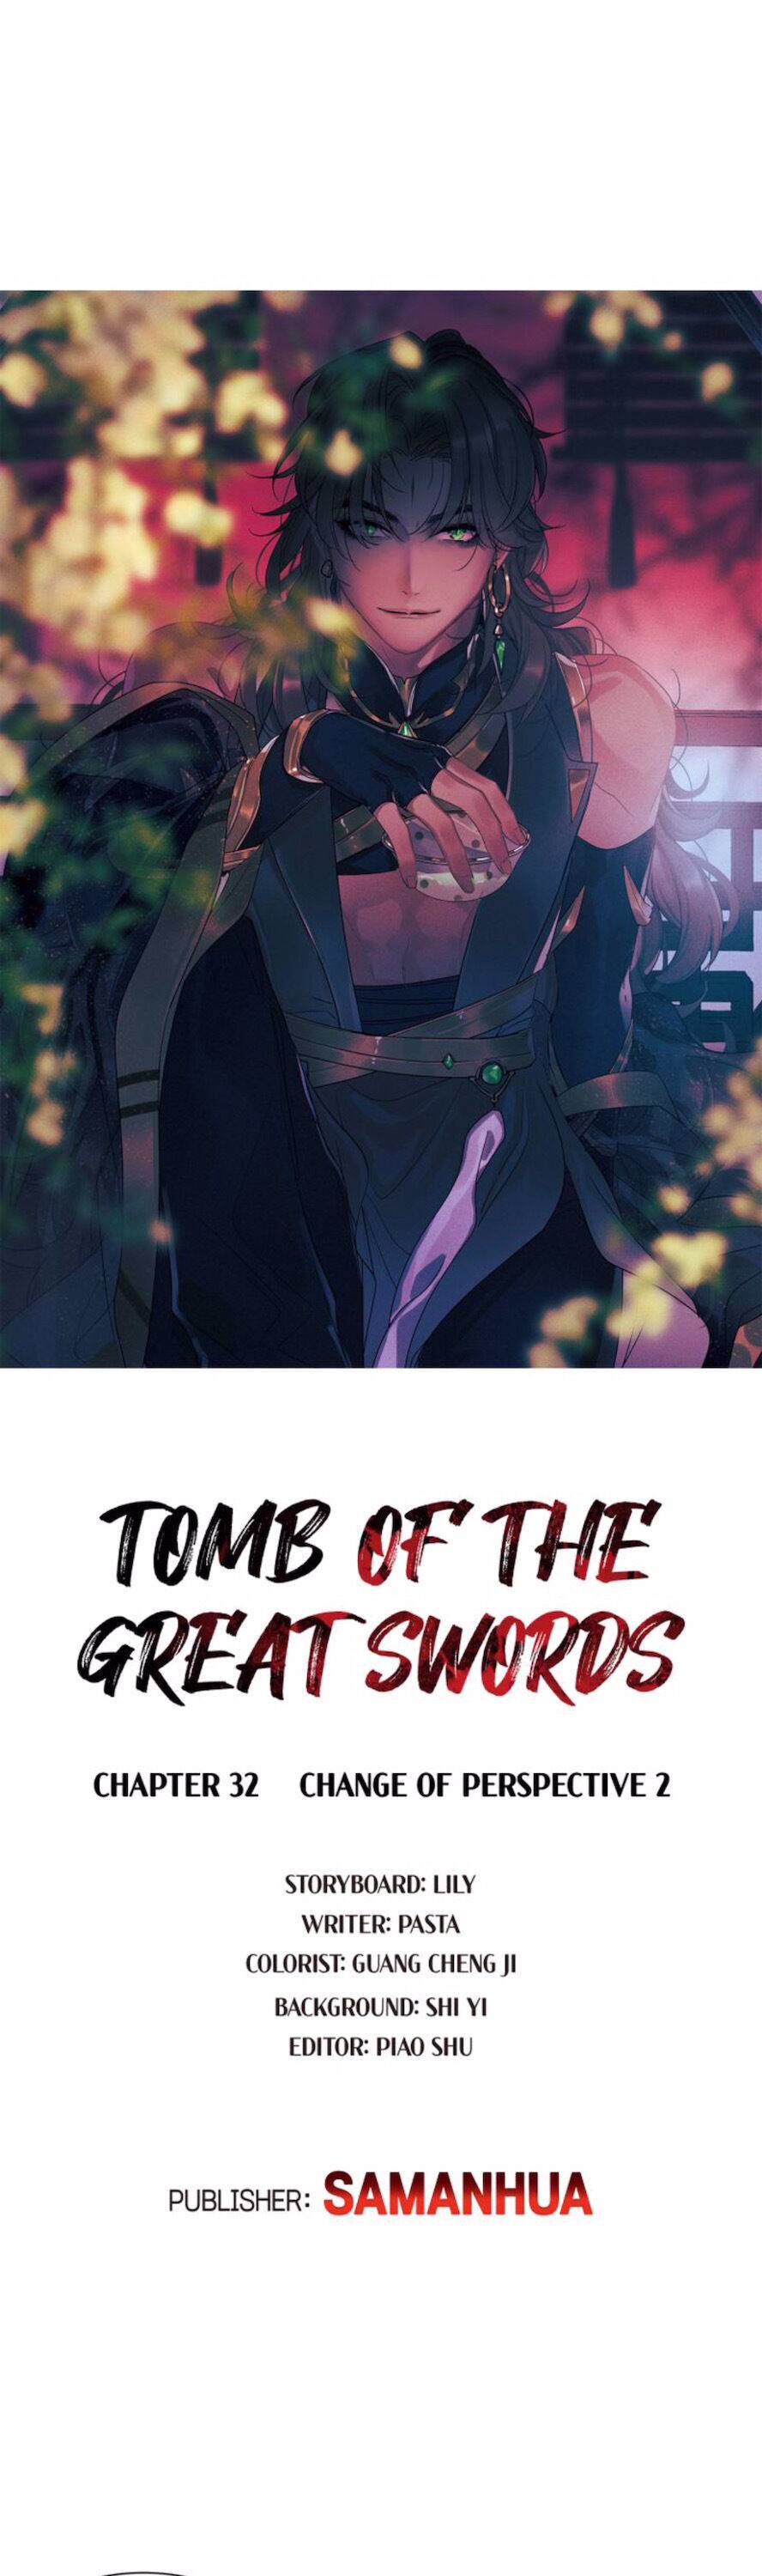 Tomb of the Great Swords Chapter 32